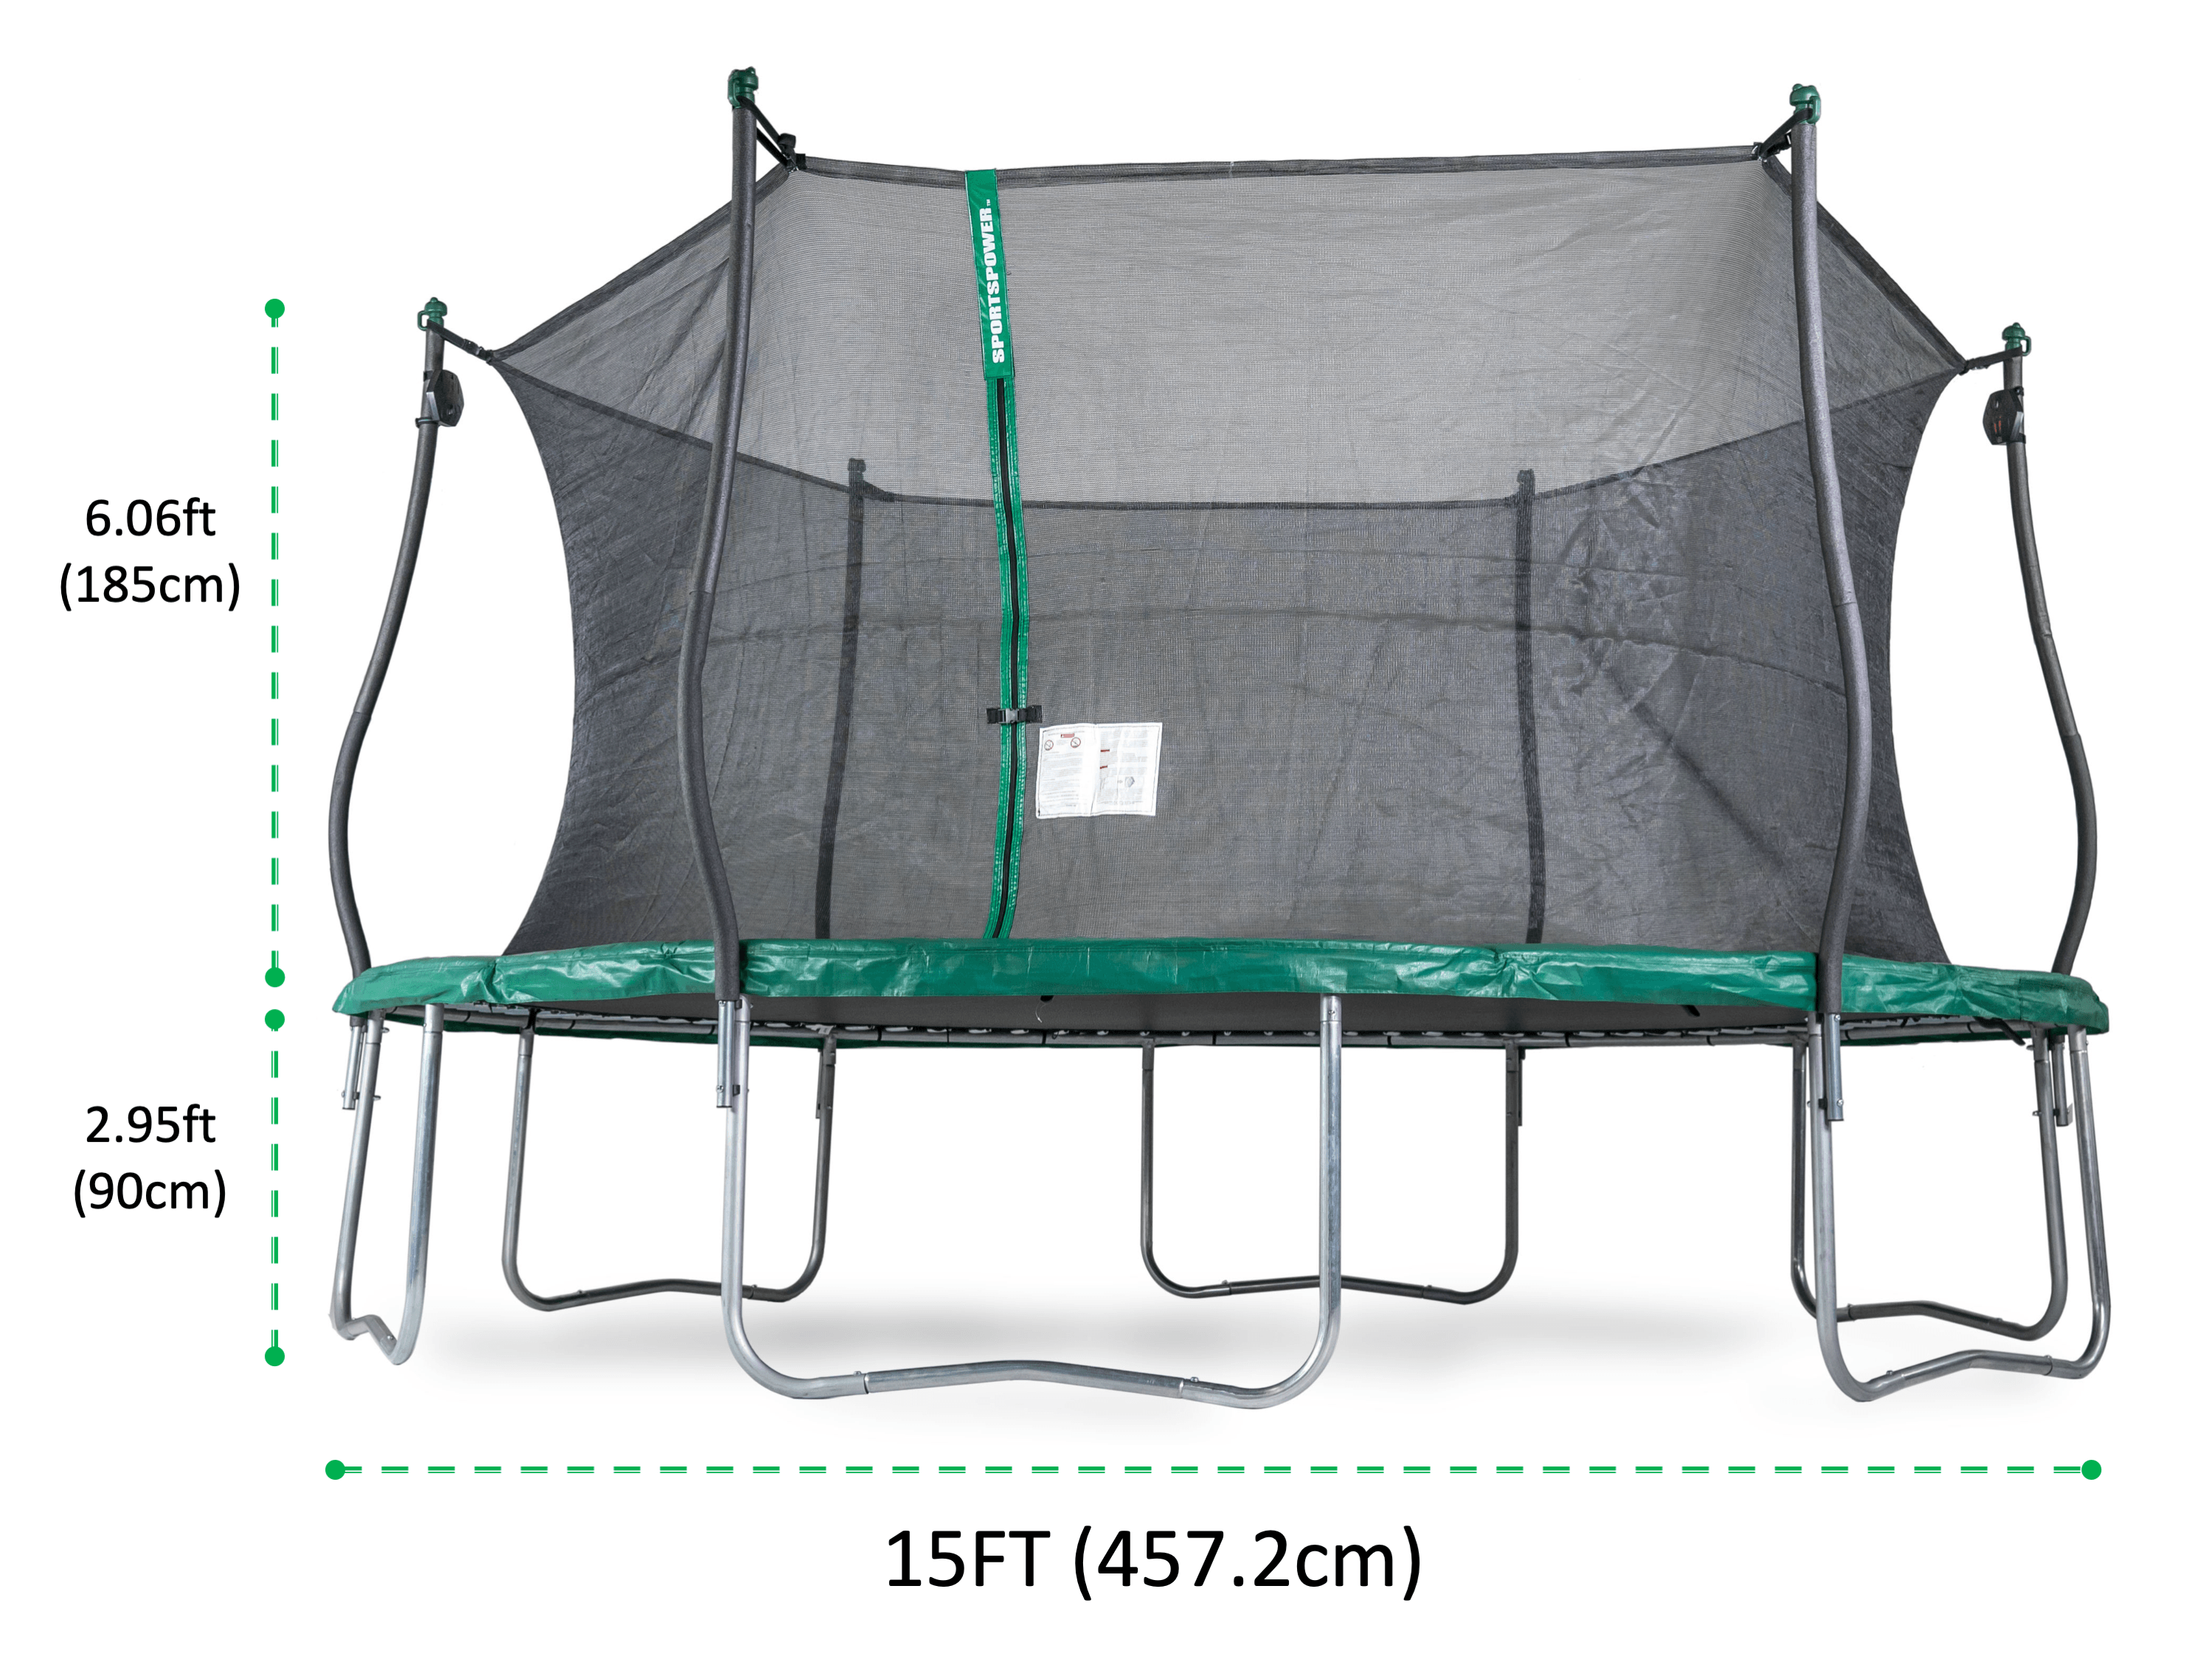 Bounce Pro 15' Trampoline, Electron Shooter Game, Basic Safety Enclosure, Green - image 2 of 7